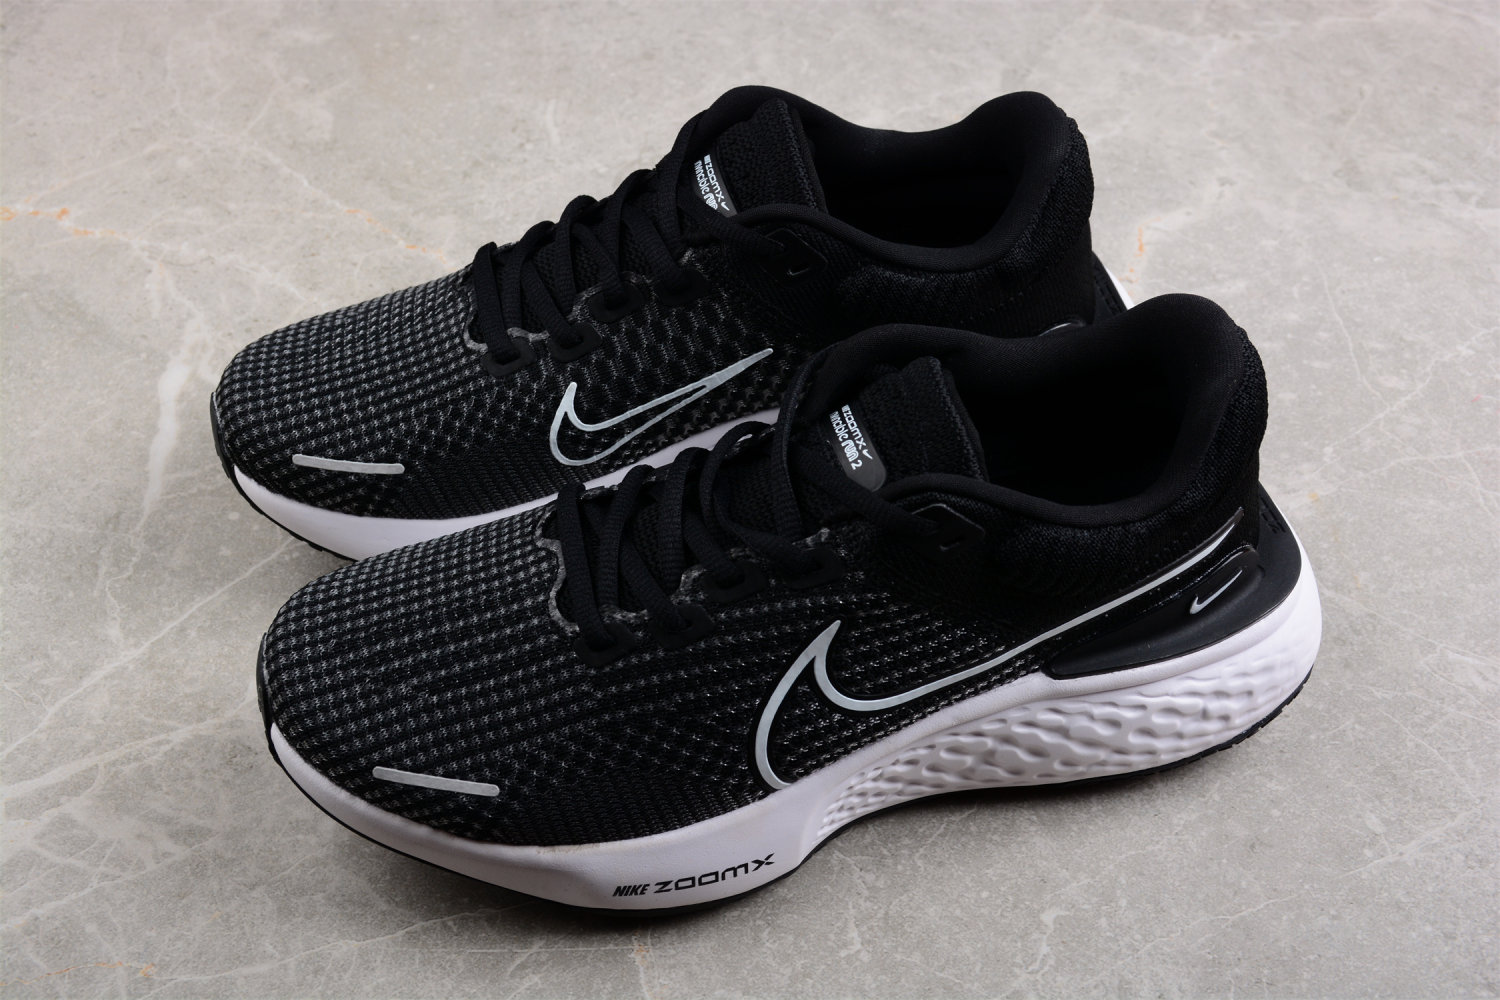 Fake ZOOM | Nike ZoomX Invincible Run Flyknit 2 Black White DH5425-001 ...